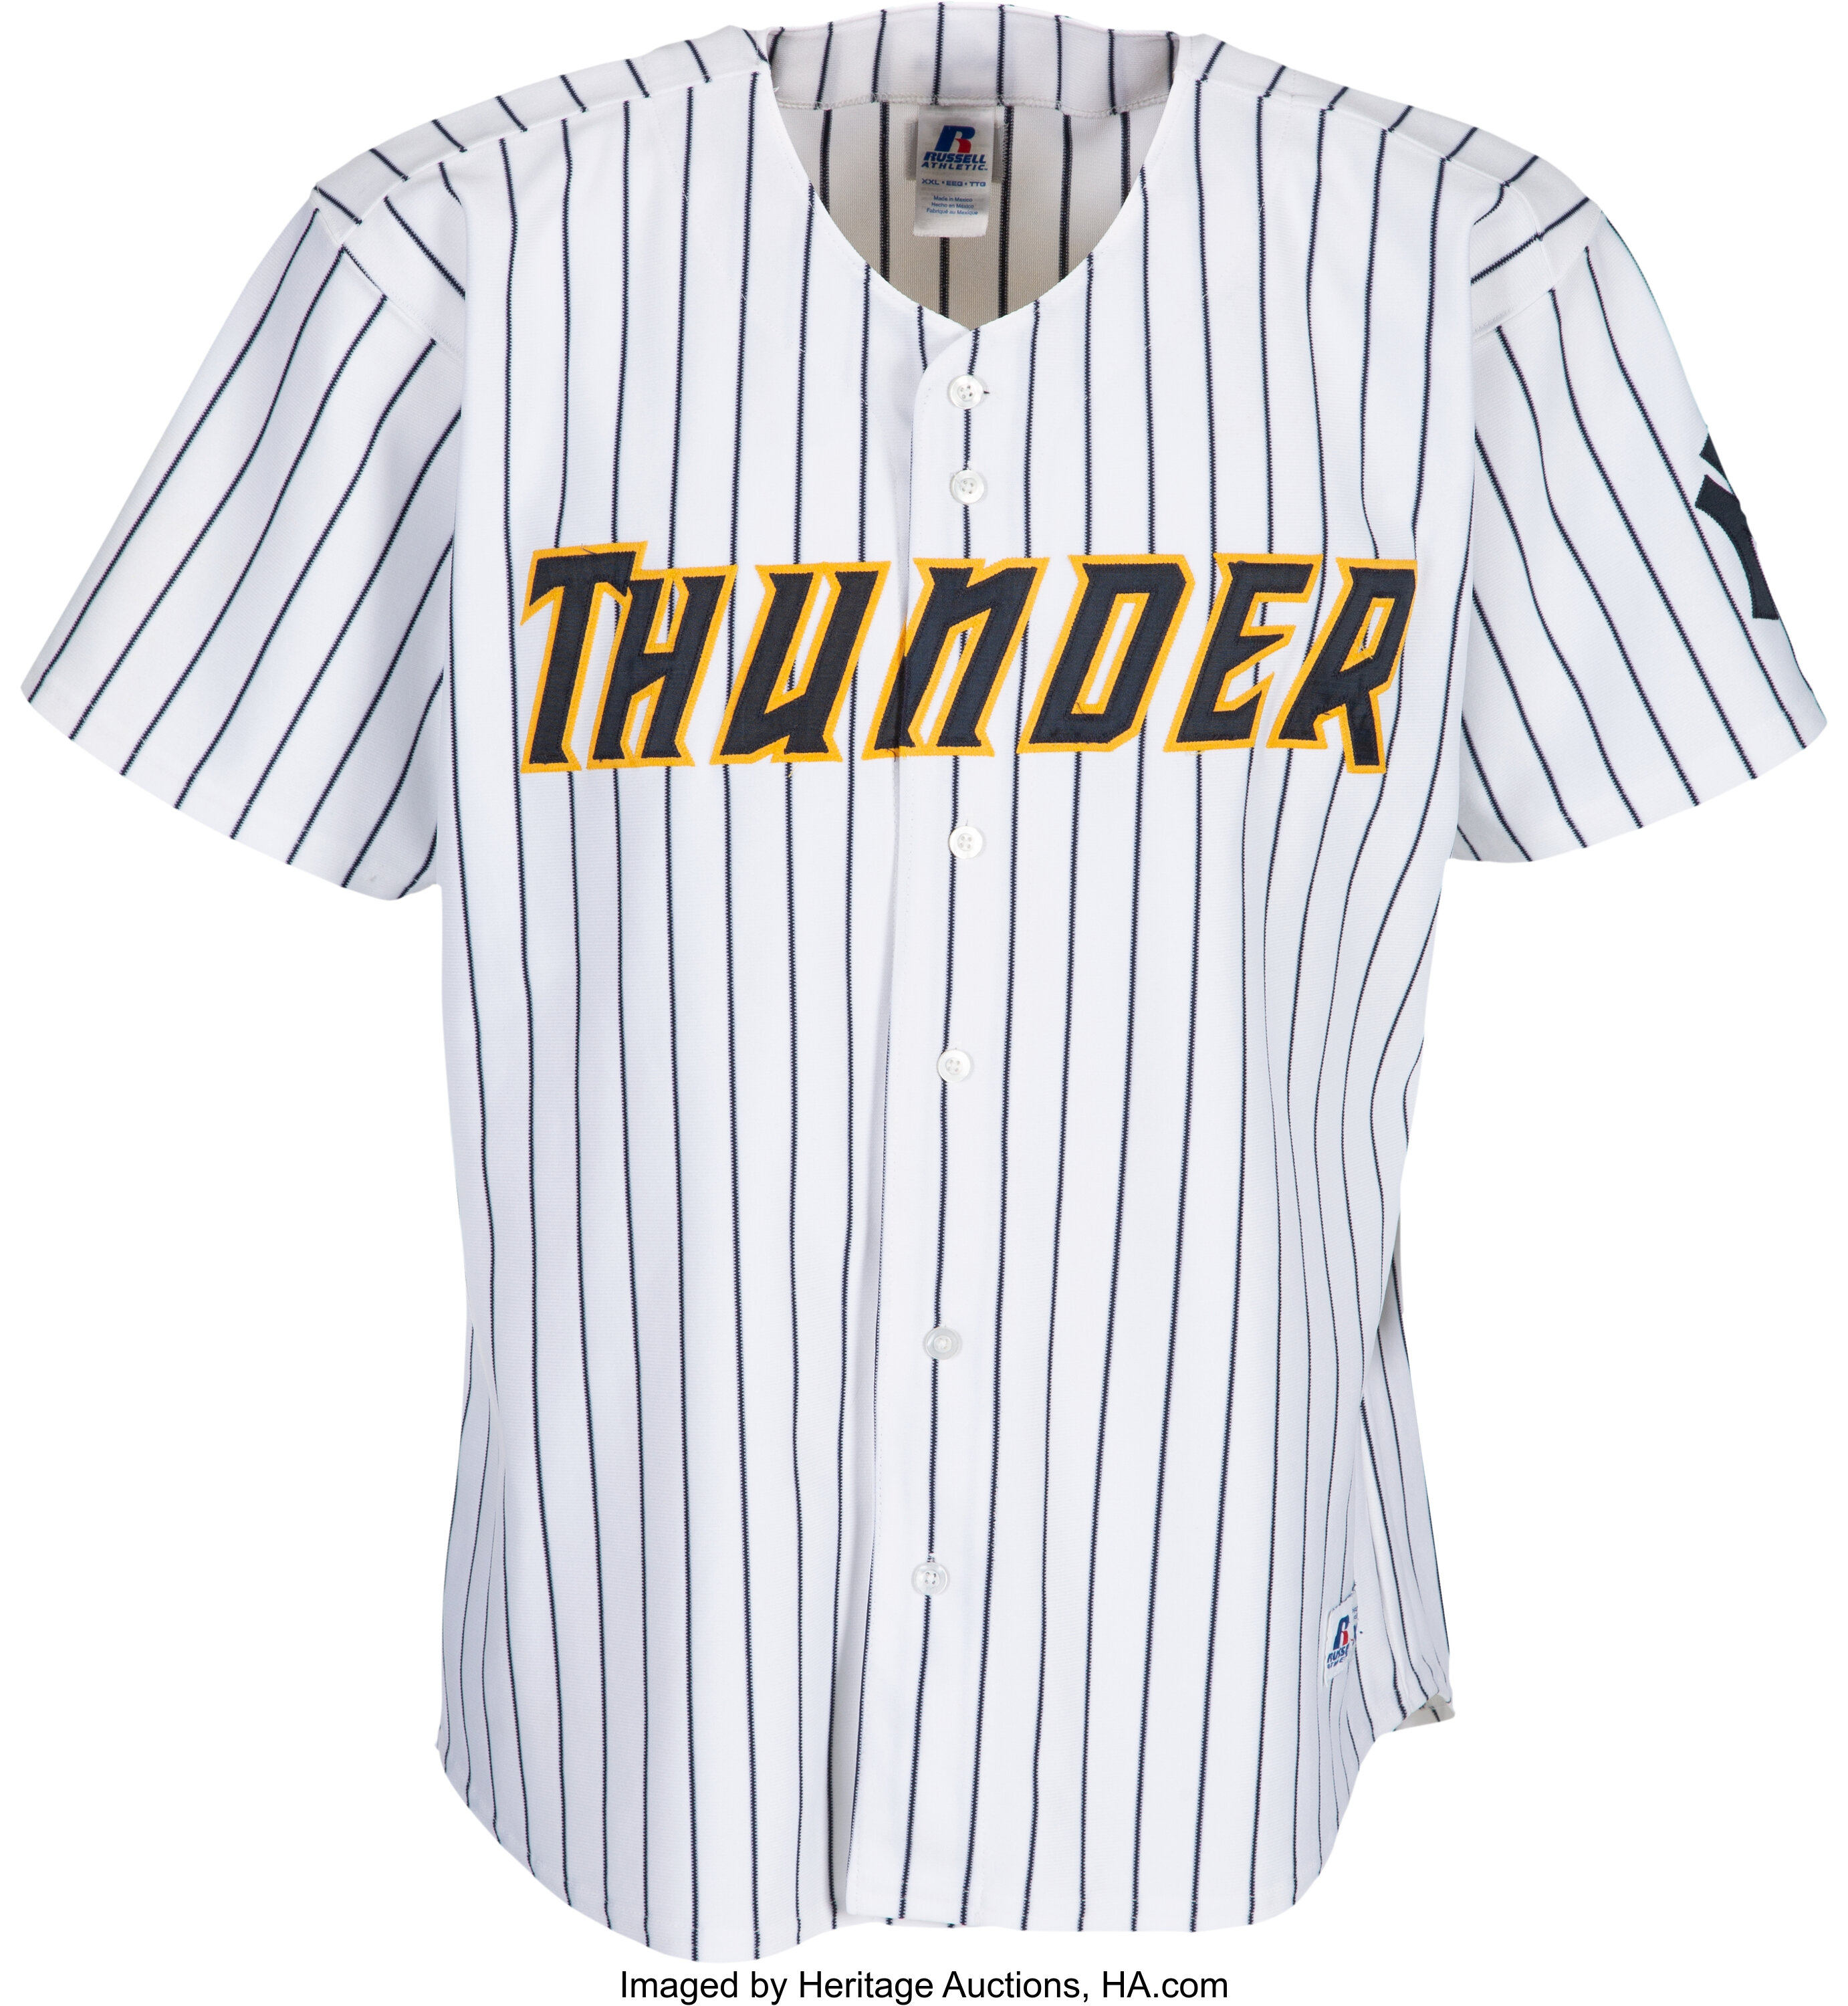 Aaron Judge Scraton/Wilkes-Barre RailRiders Fanatics Authentic  Player-Issued #99 White Pinstripe Jersey from the 2019 MiLB Season